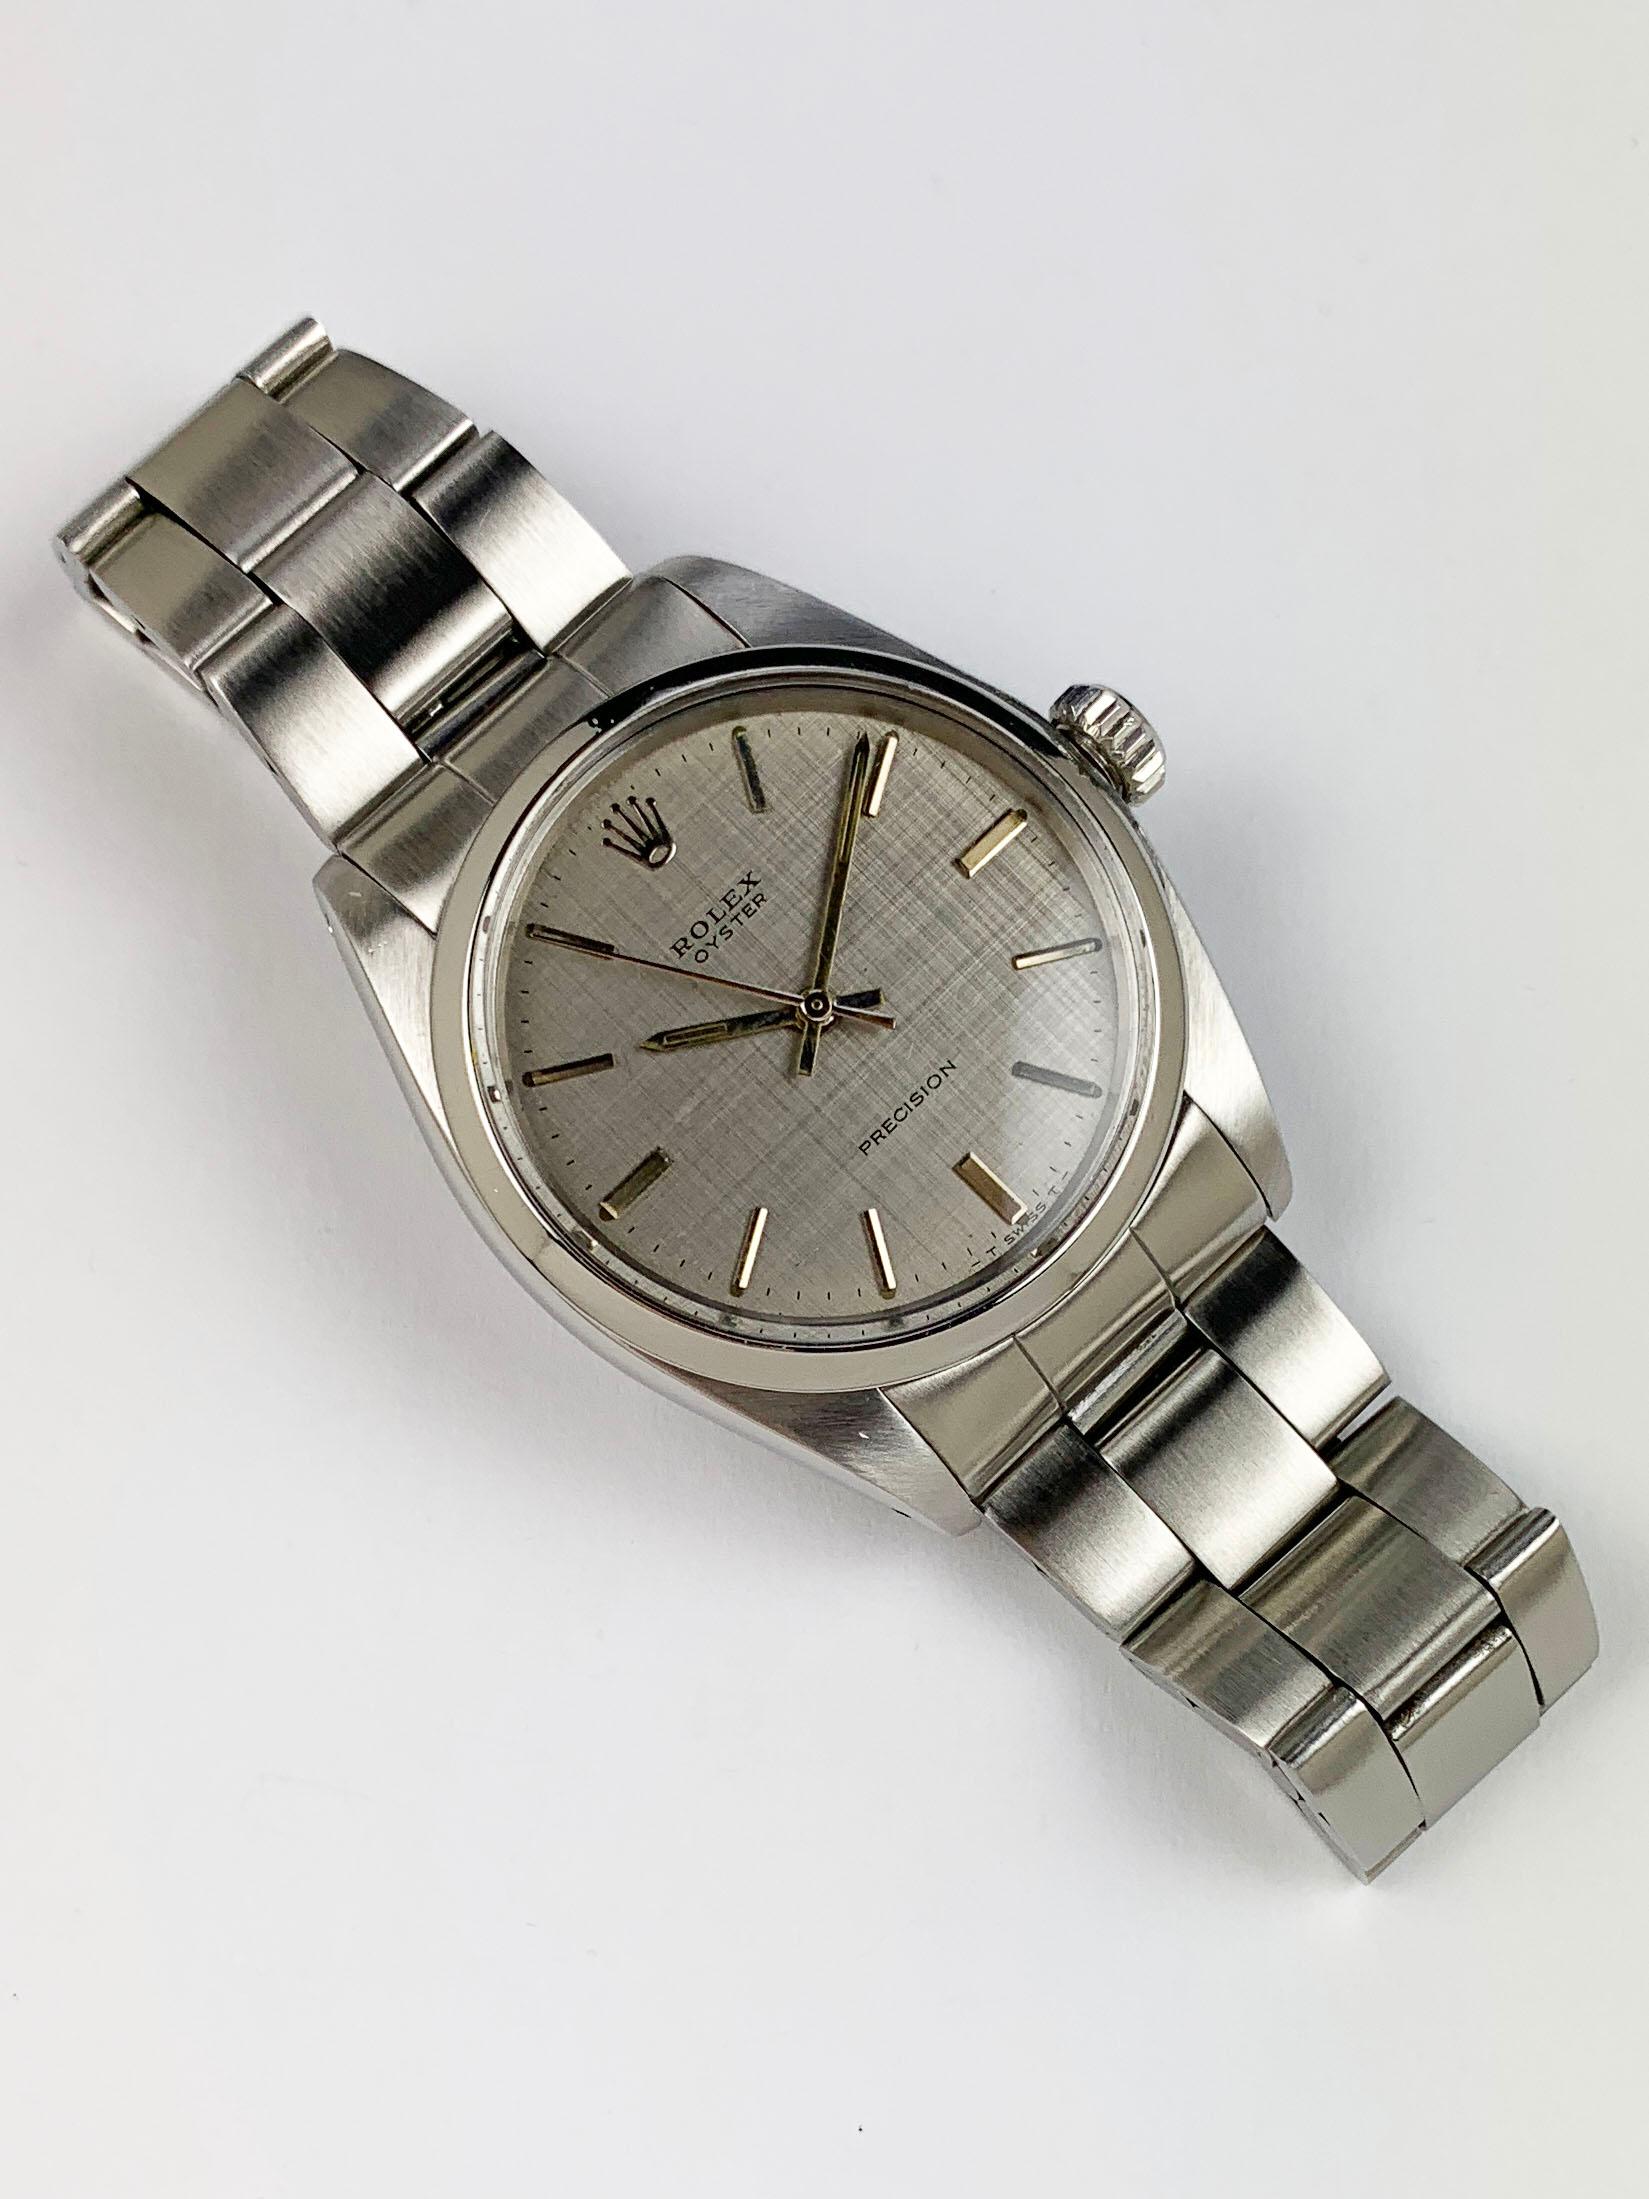 Rolex Stainless Steel Oyster Precision Manual Wind Watch
Factory Silvered Linen Dial with Applied Hour Markers
Stainless Steel Smooth Bezel
Stainless Steel Case
34mm in size 
Features Rolex Manual Wind/Hand Winding Movement 
Acrylic Crystal
From